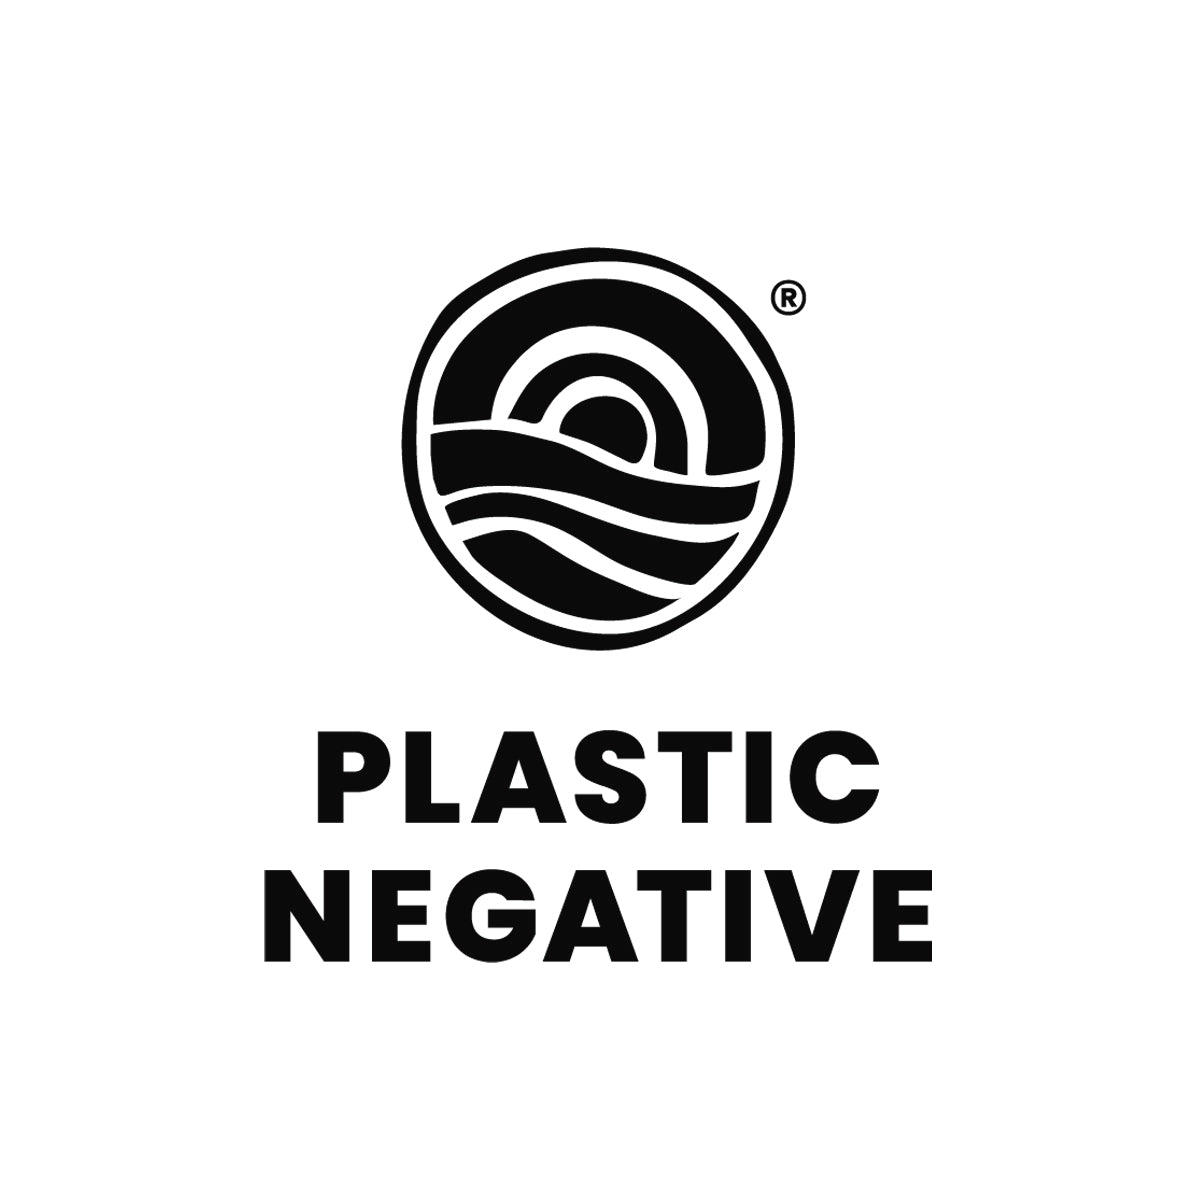 We recently partnered with rePurpose Global to become Plastic Negative Certified. We offset 2X the amount of plastic generated by bottle droppers, jar lids and other plastic that sneaks its way into our supply chain.